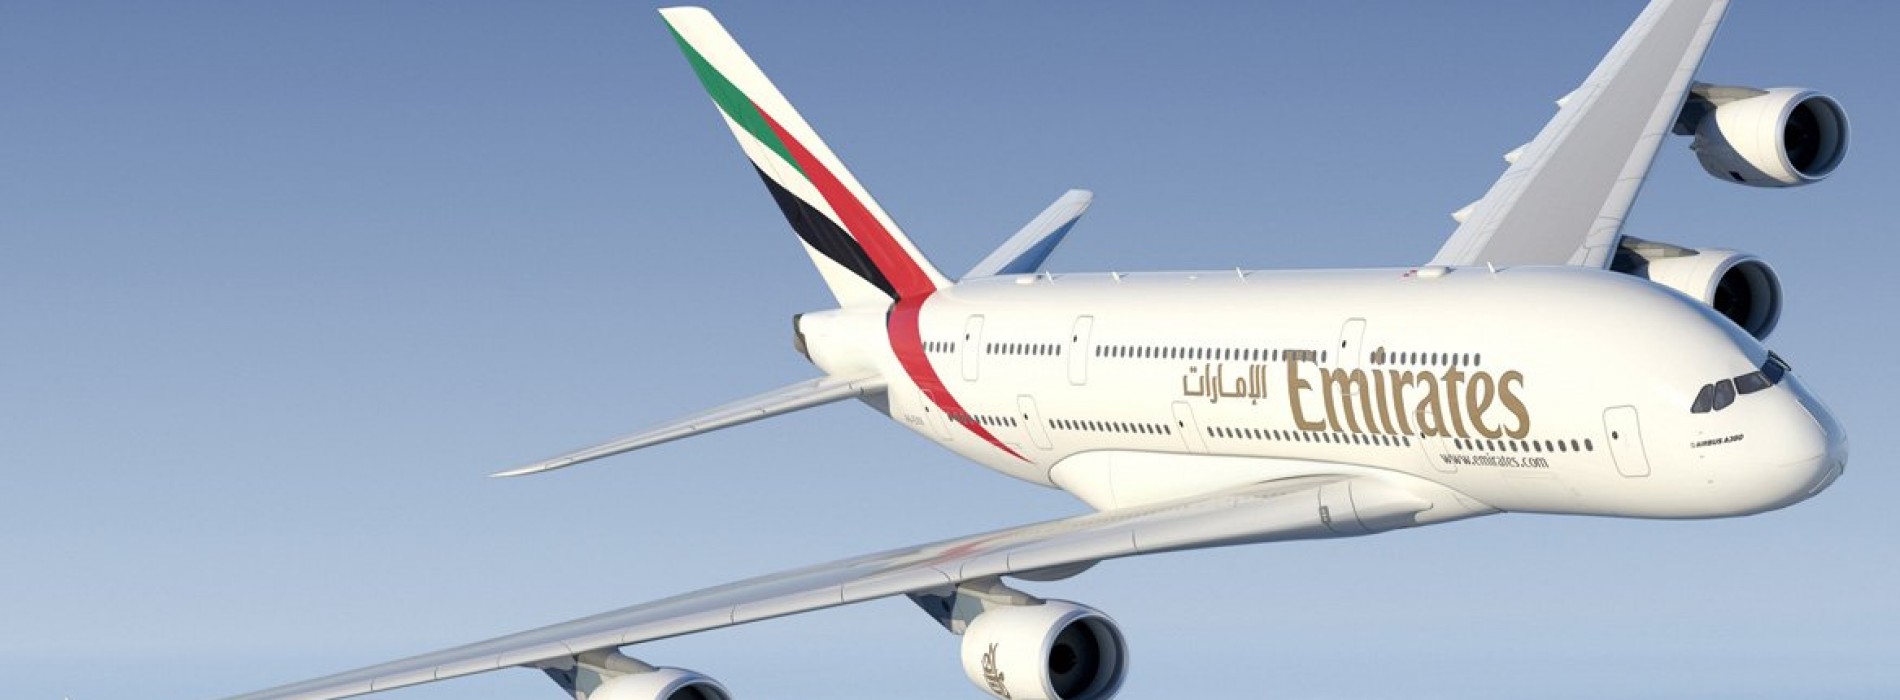 Emirates sets new record with over 1 million Wi-Fi connections on board